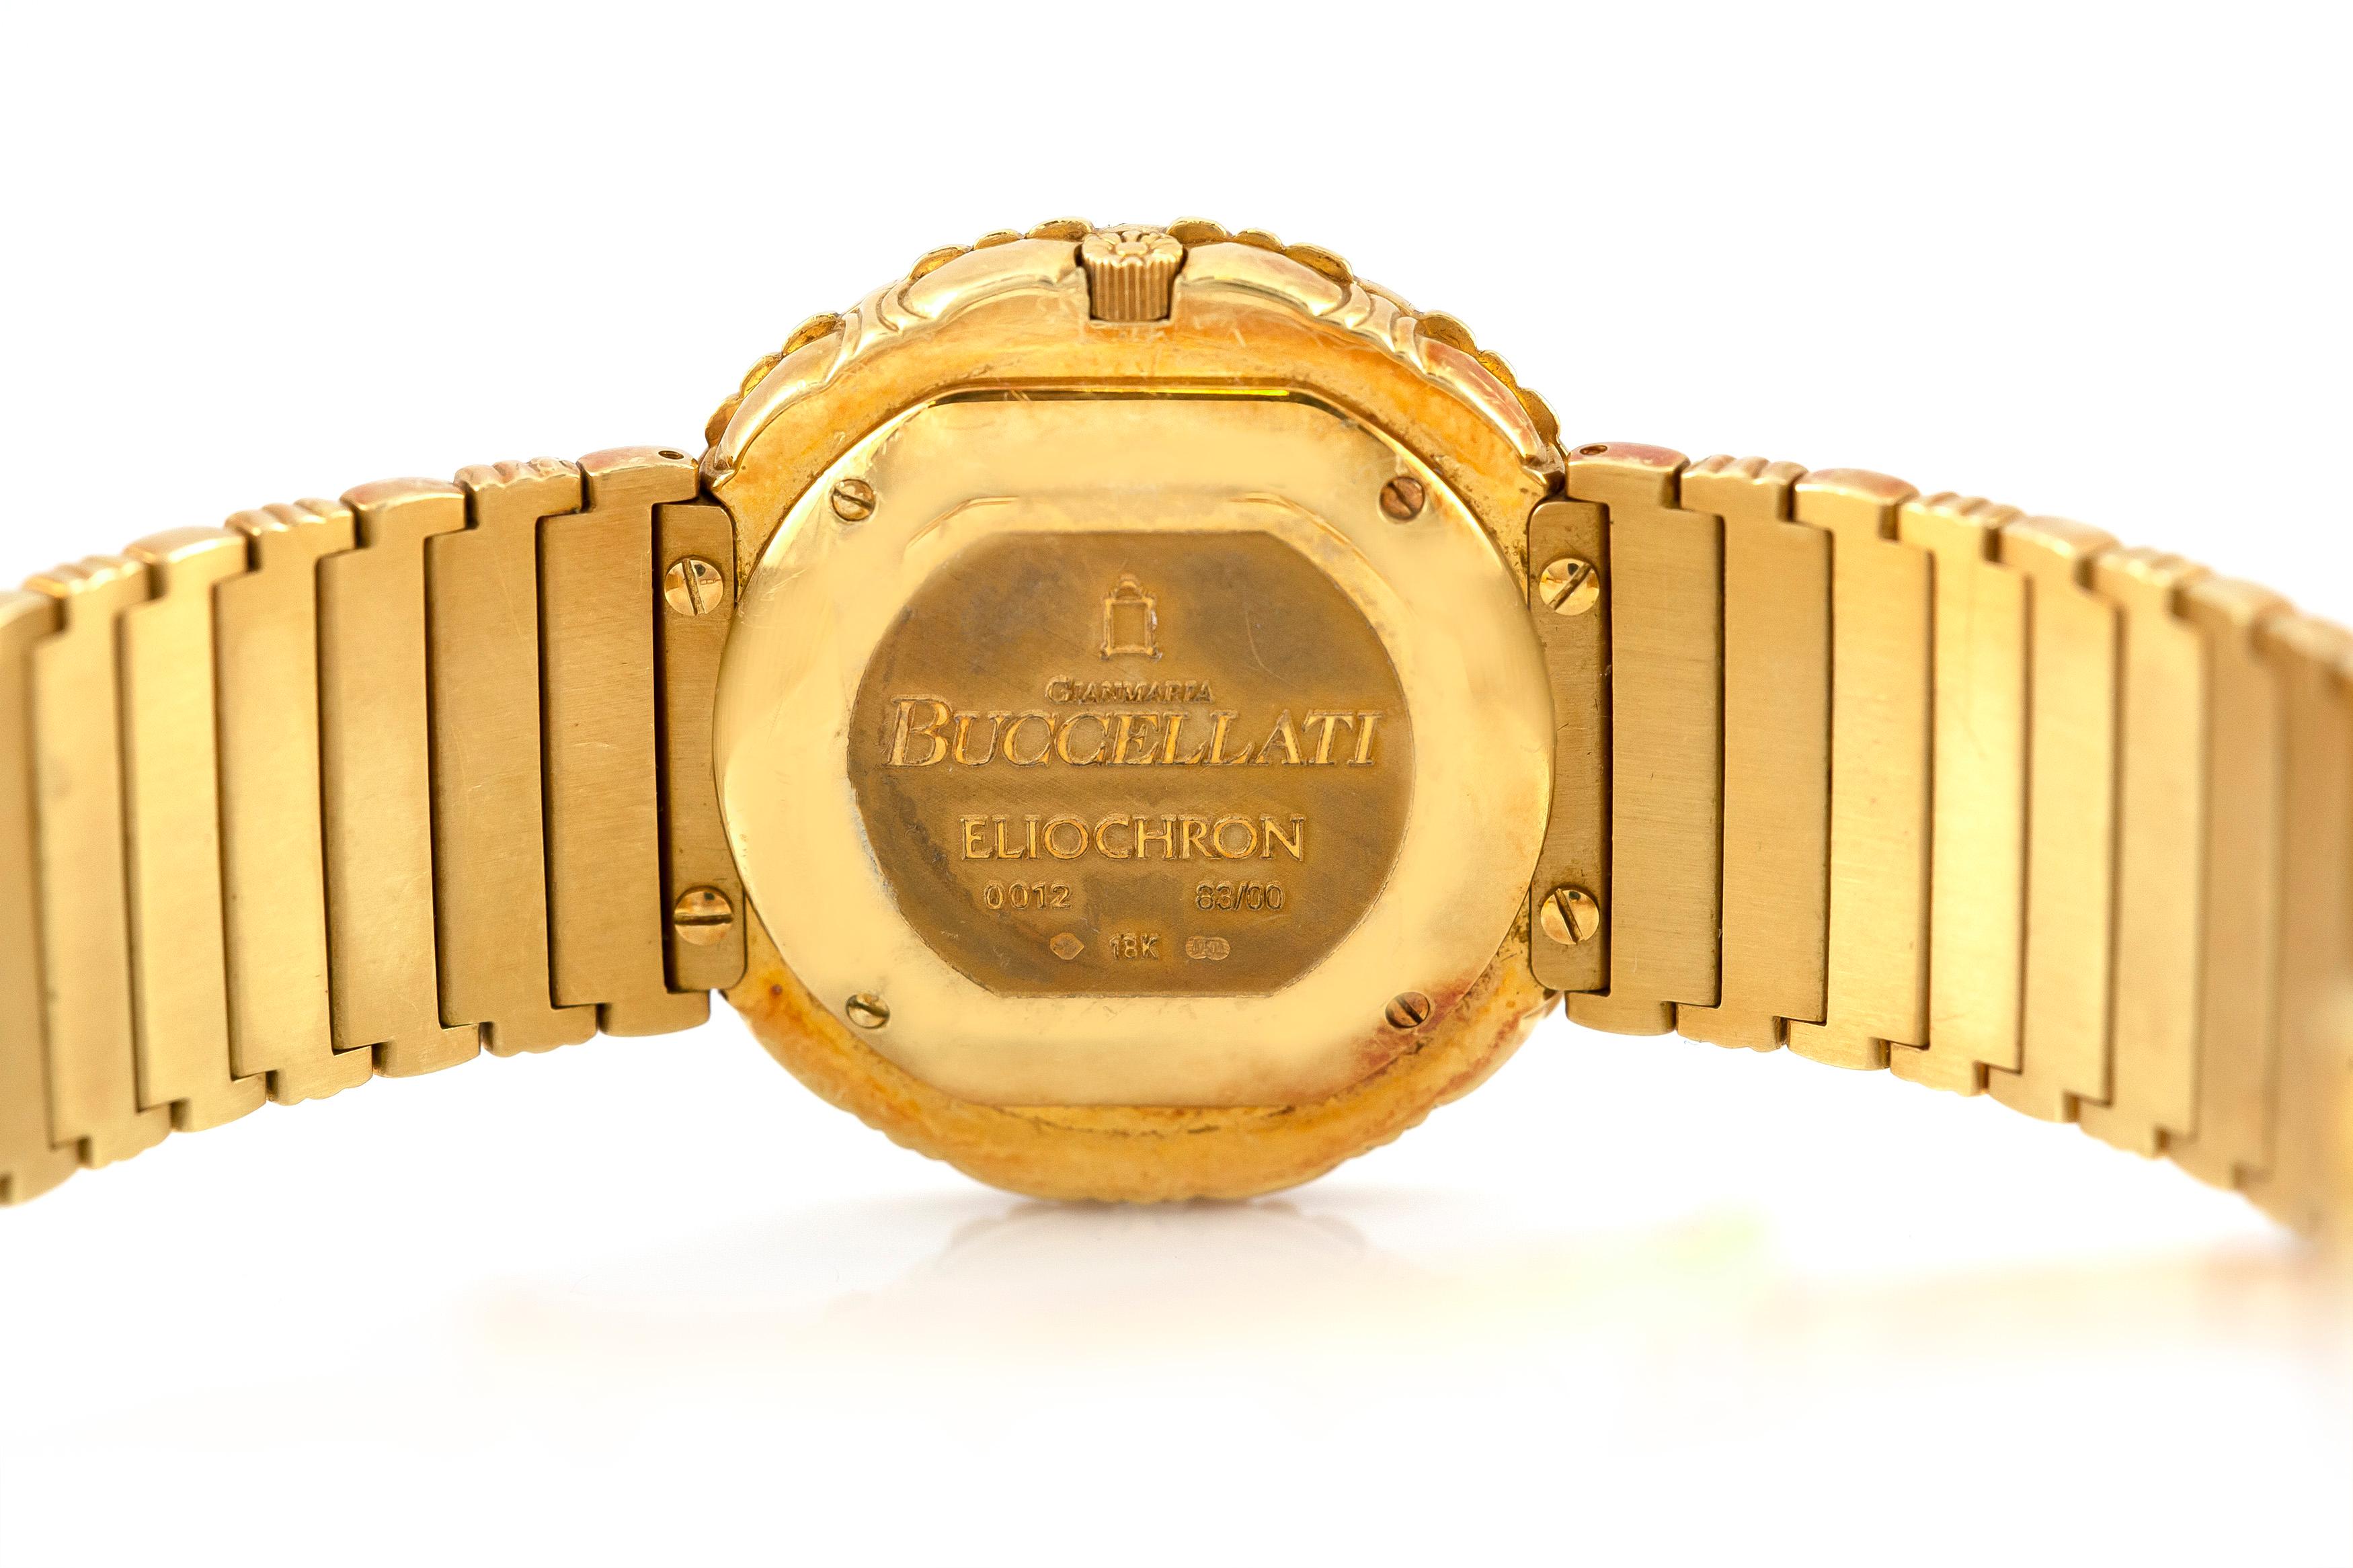 The watch is finely crafted in 18k yellow gold .

SIgn Buccellati.